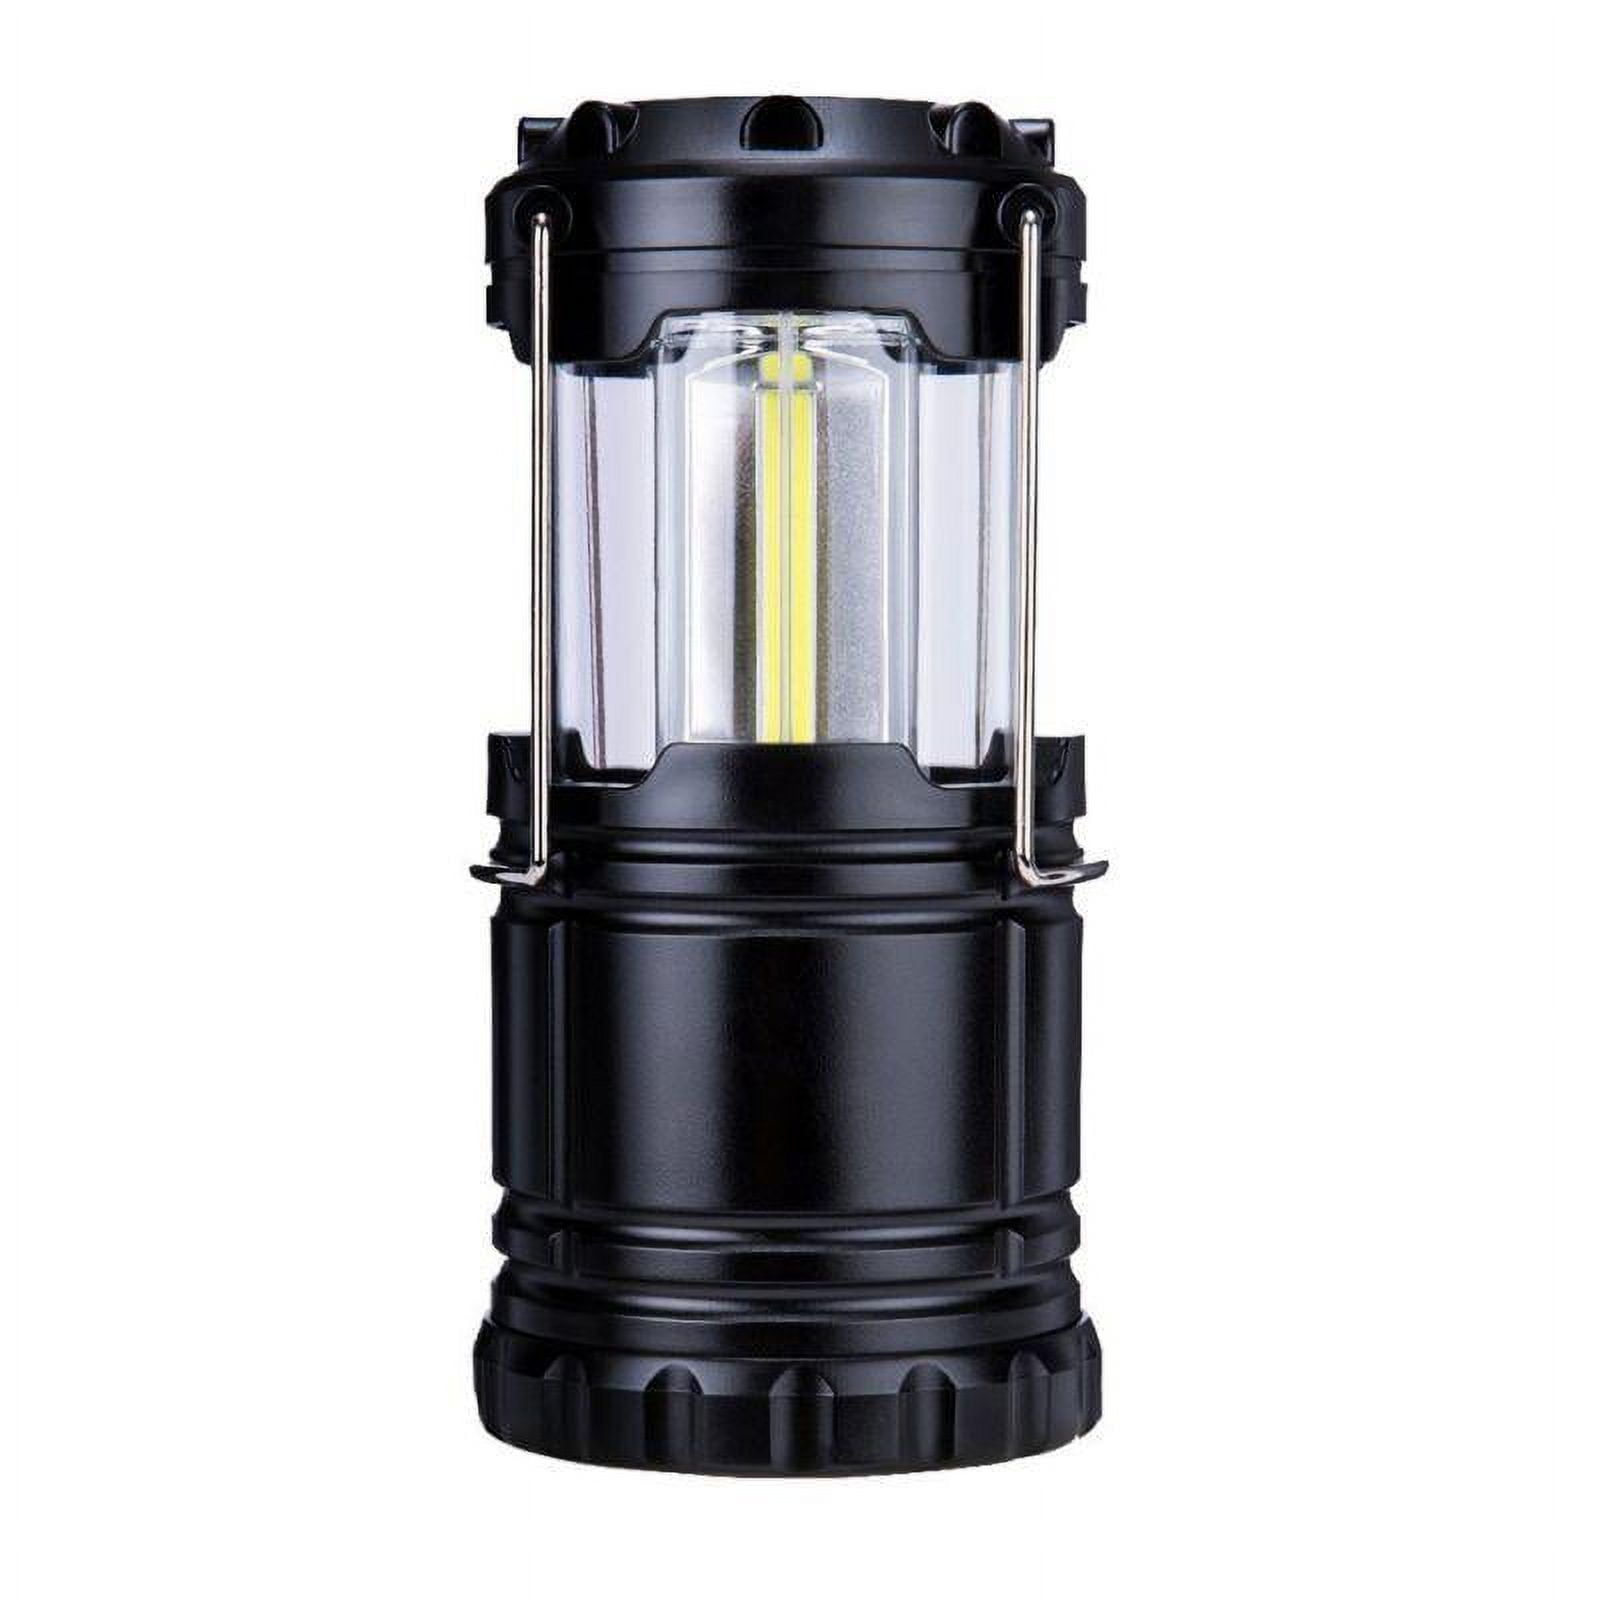 2Pack 360 LED Collapsible Camping Lantern IPX4 Water Resistant Super Bright Battery  Powered - Lanterns, Facebook Marketplace